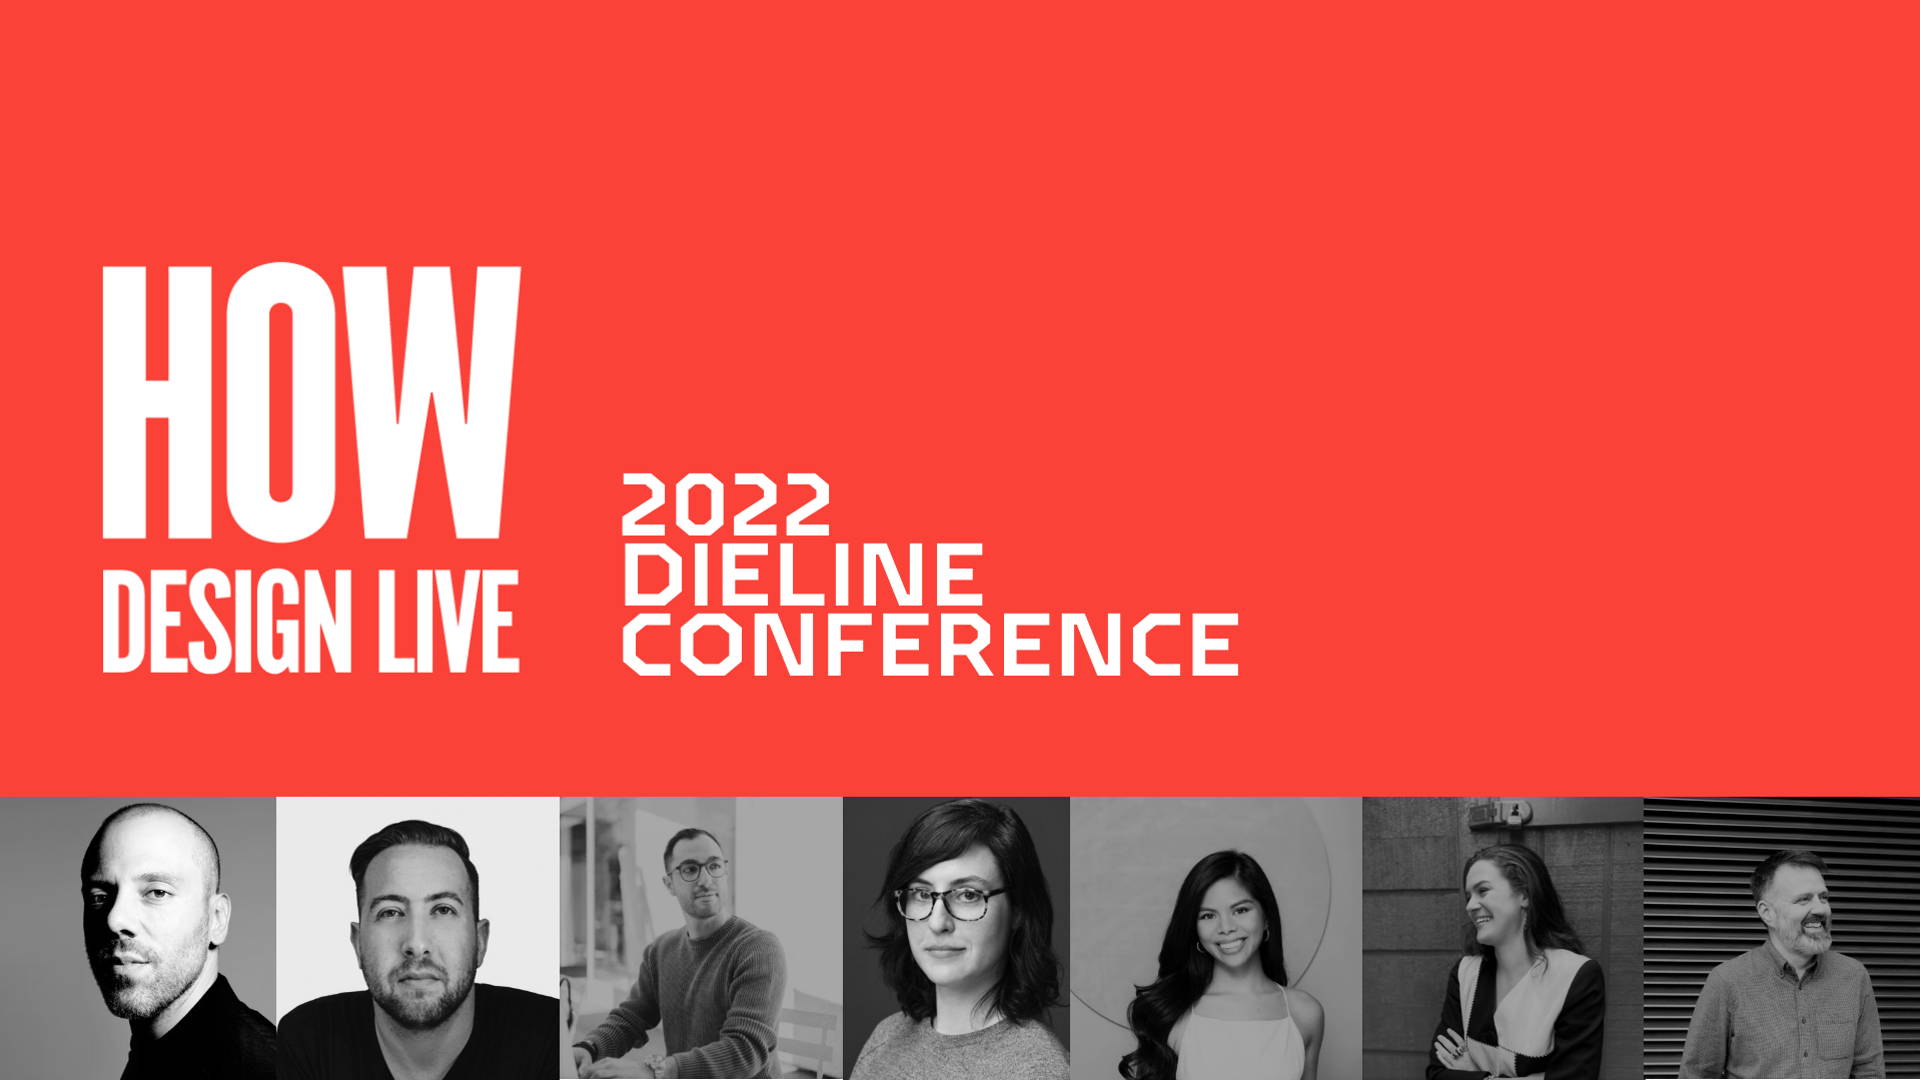 Featured image for Dieline Conference at HOW Design Live